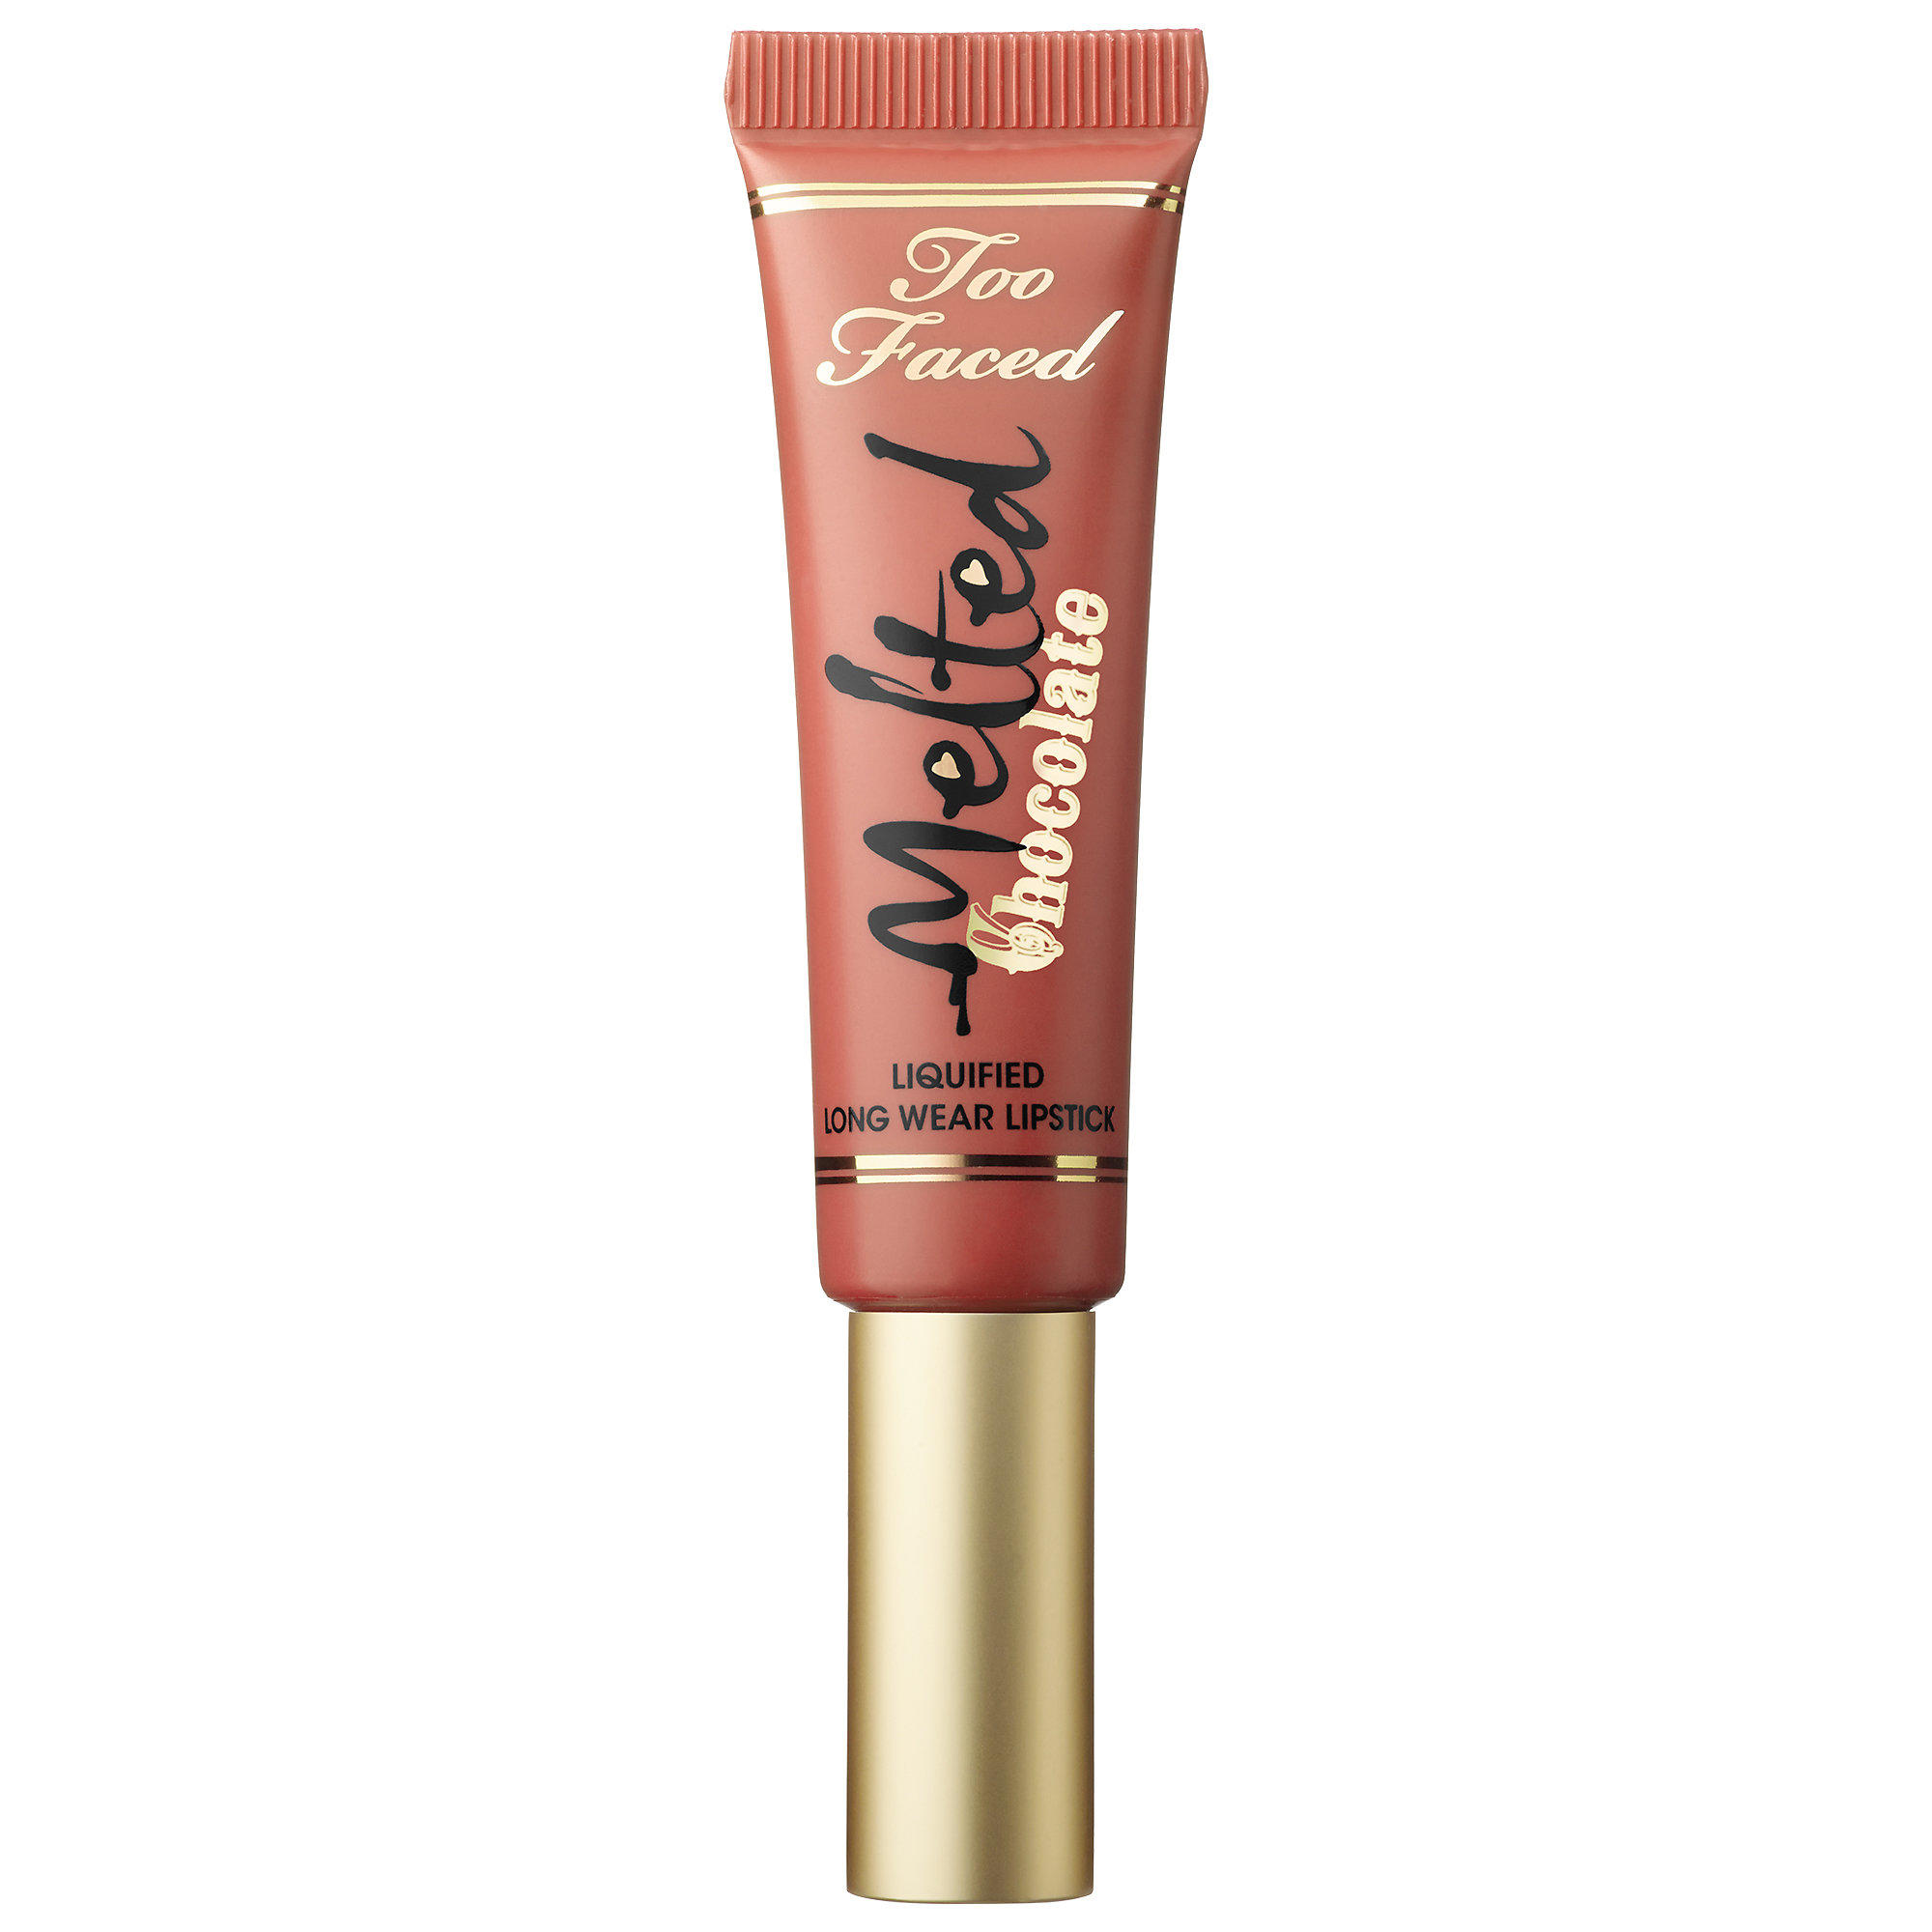 Too Faced Melted Chocolate Liquified Lipstick Chocolate Milkshake